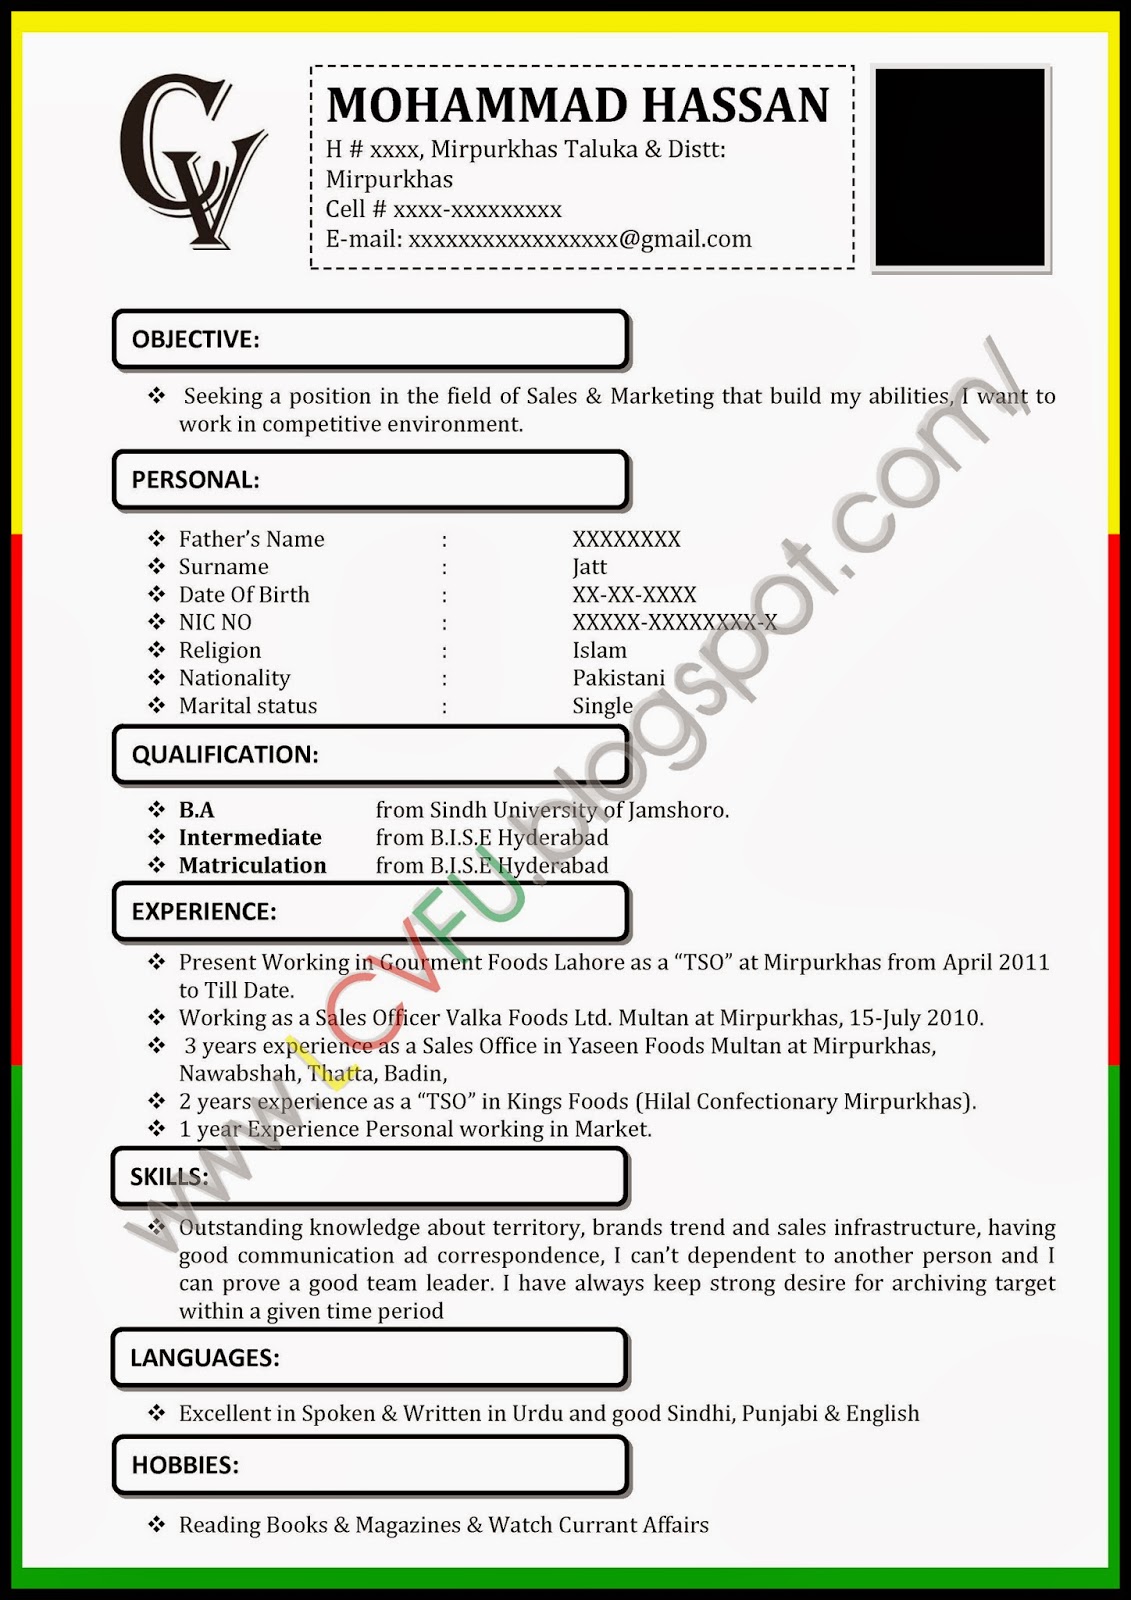 Resume rules and tips 2012